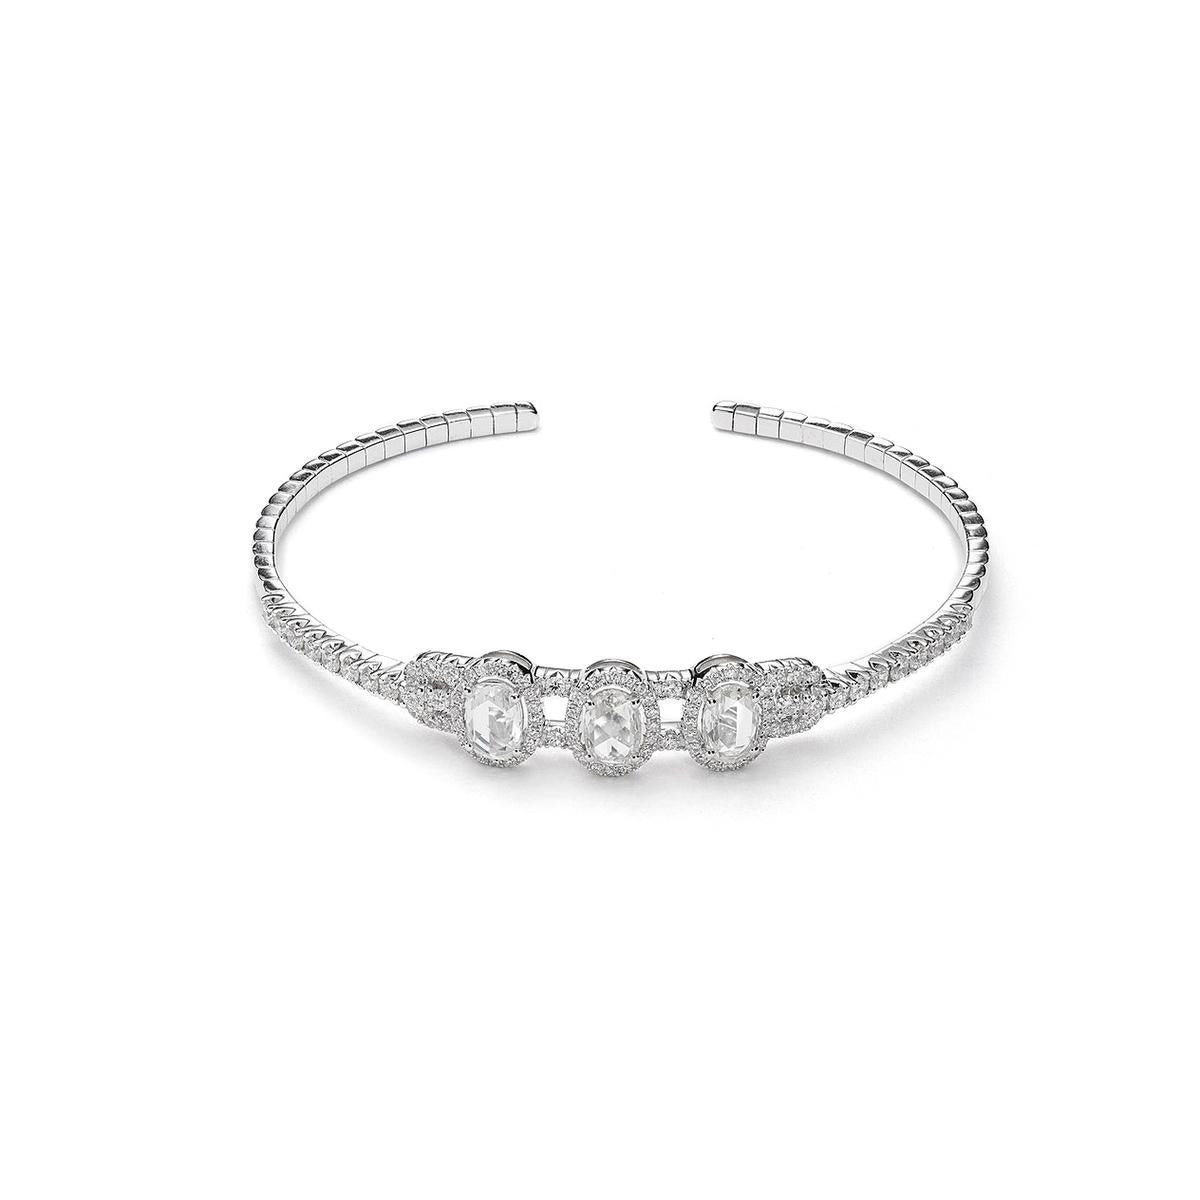 Bangle in 18kt white gold set with 3 oval rose cut diamond 1.85 cts and 96 diamonds 1.46 cts     